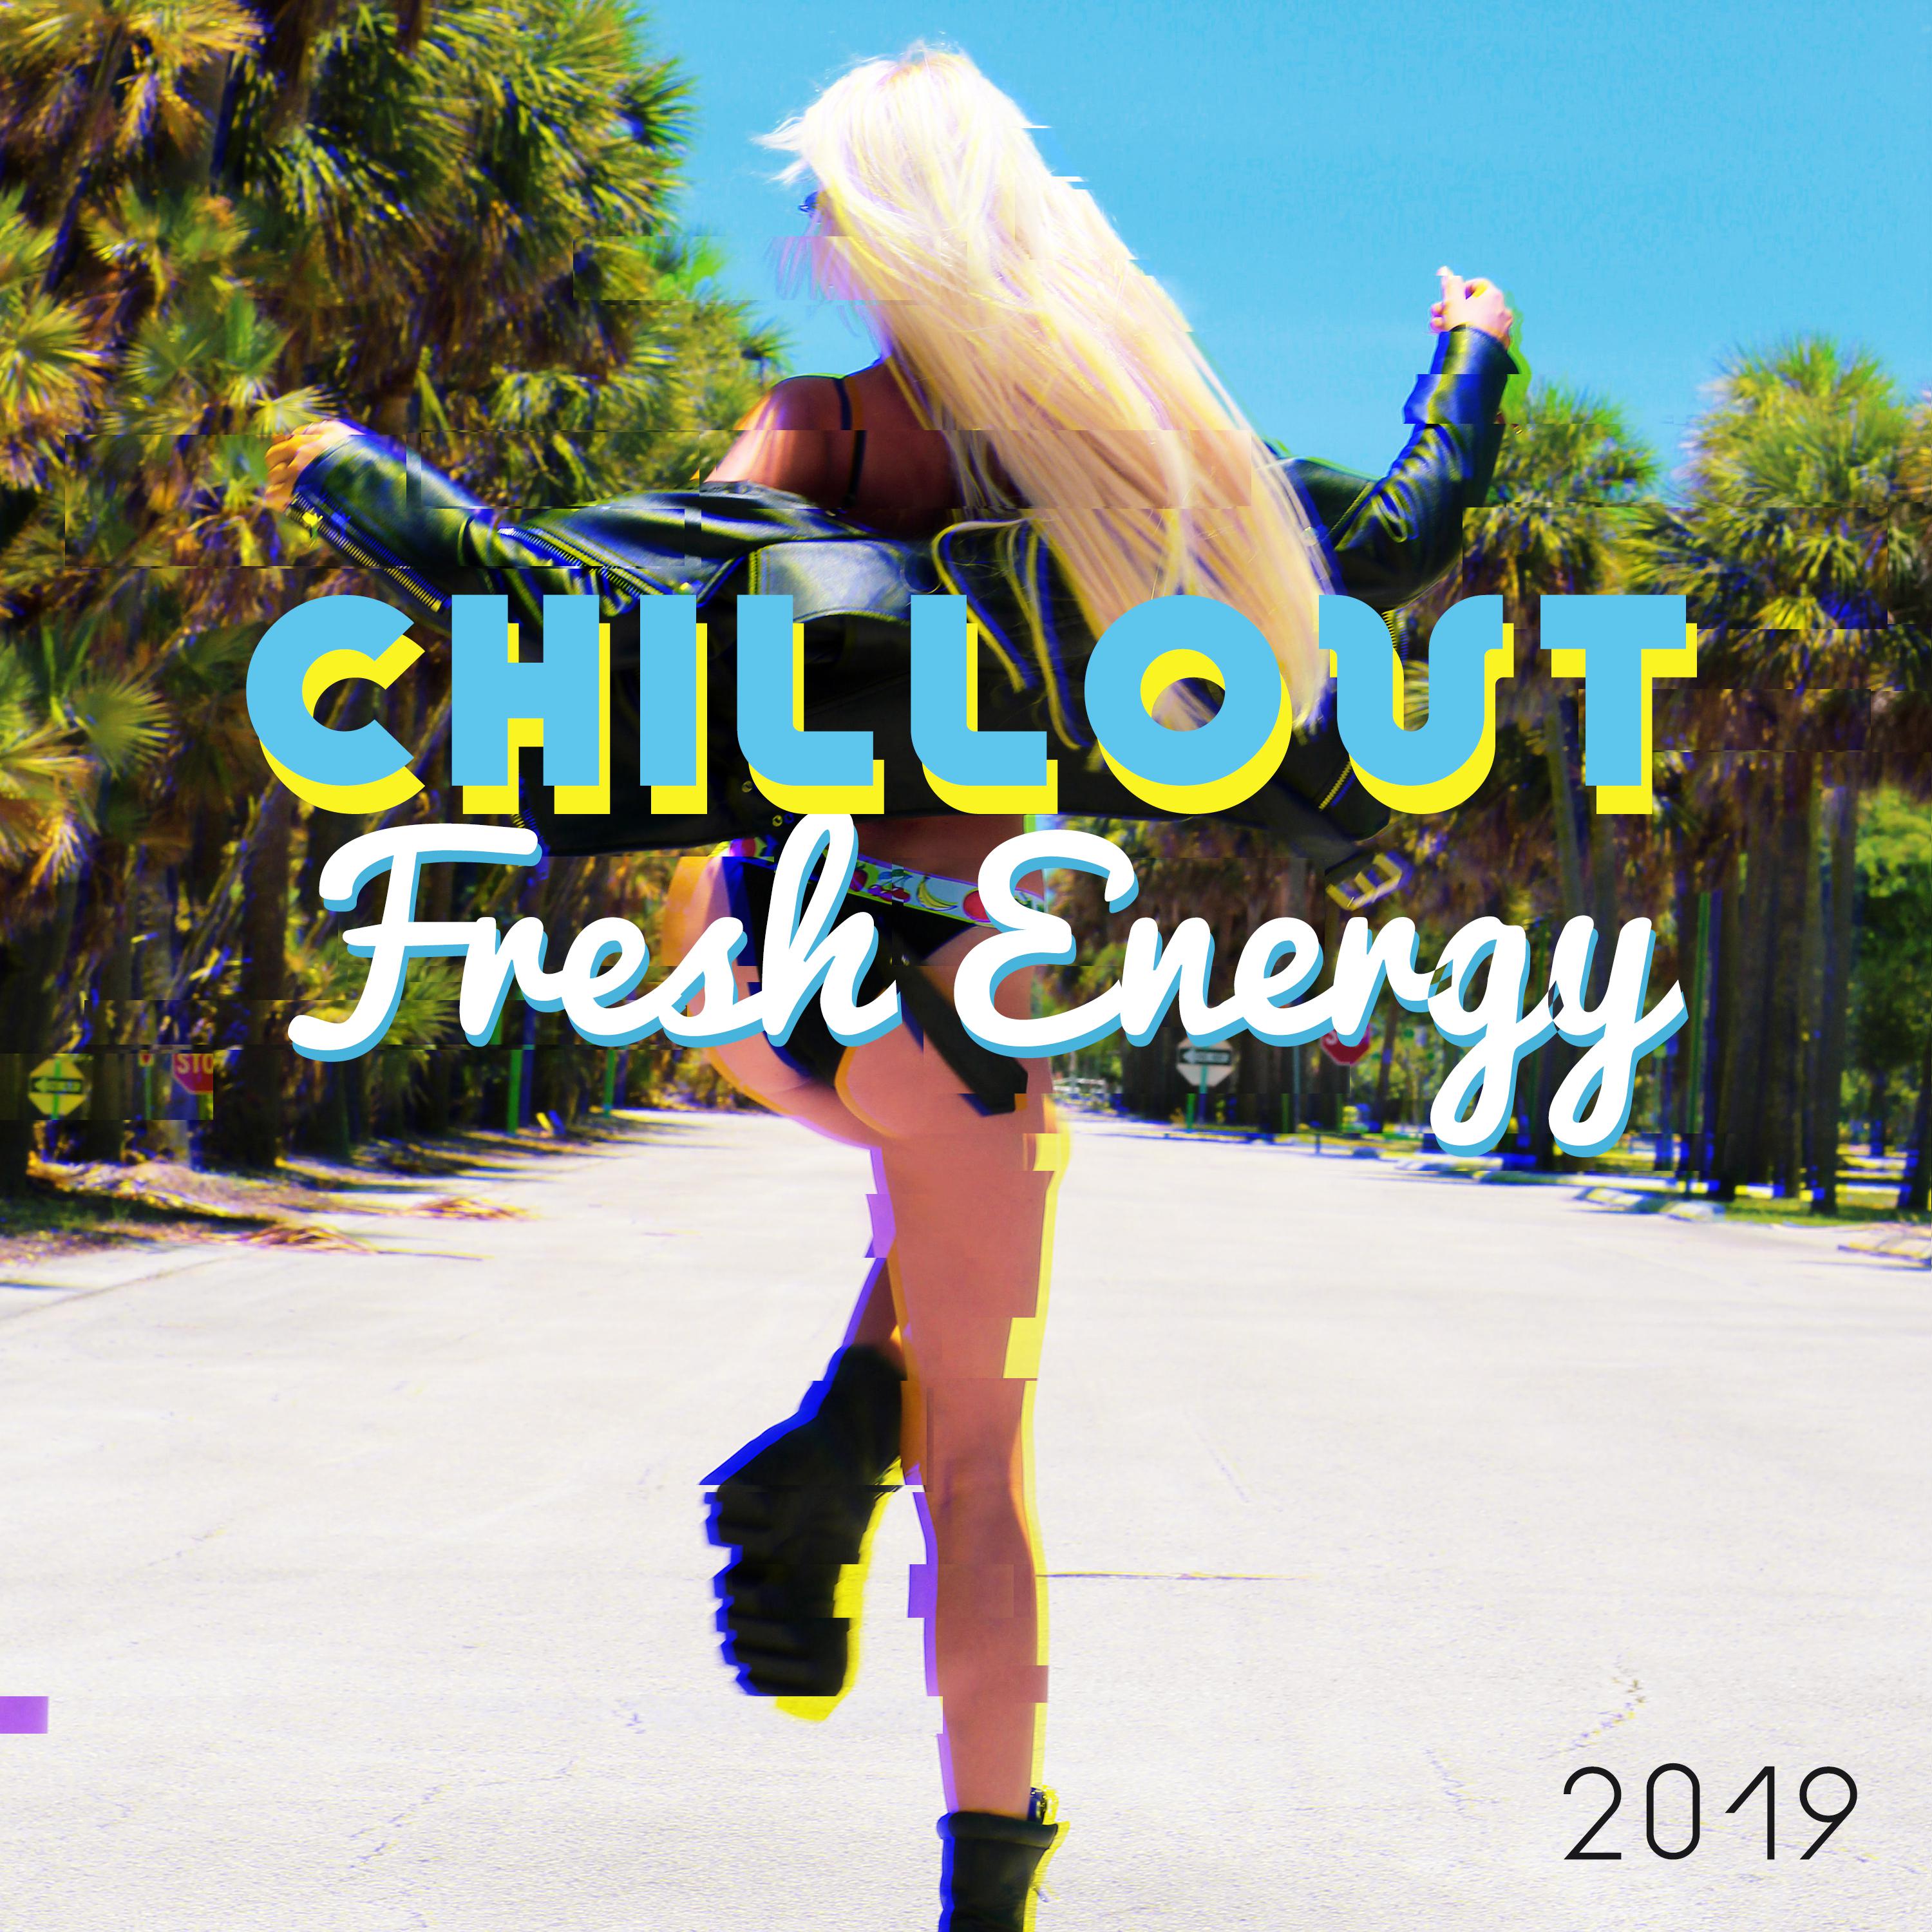 Chillout Fresh Energy 2019 – Compilation of Top Chill Out Electronic Holiday Vibes, Sweet Melodies & Deep Pumping Beats, Music Perfect for Relaxation on the Beach or for the Pool Cocktail Party